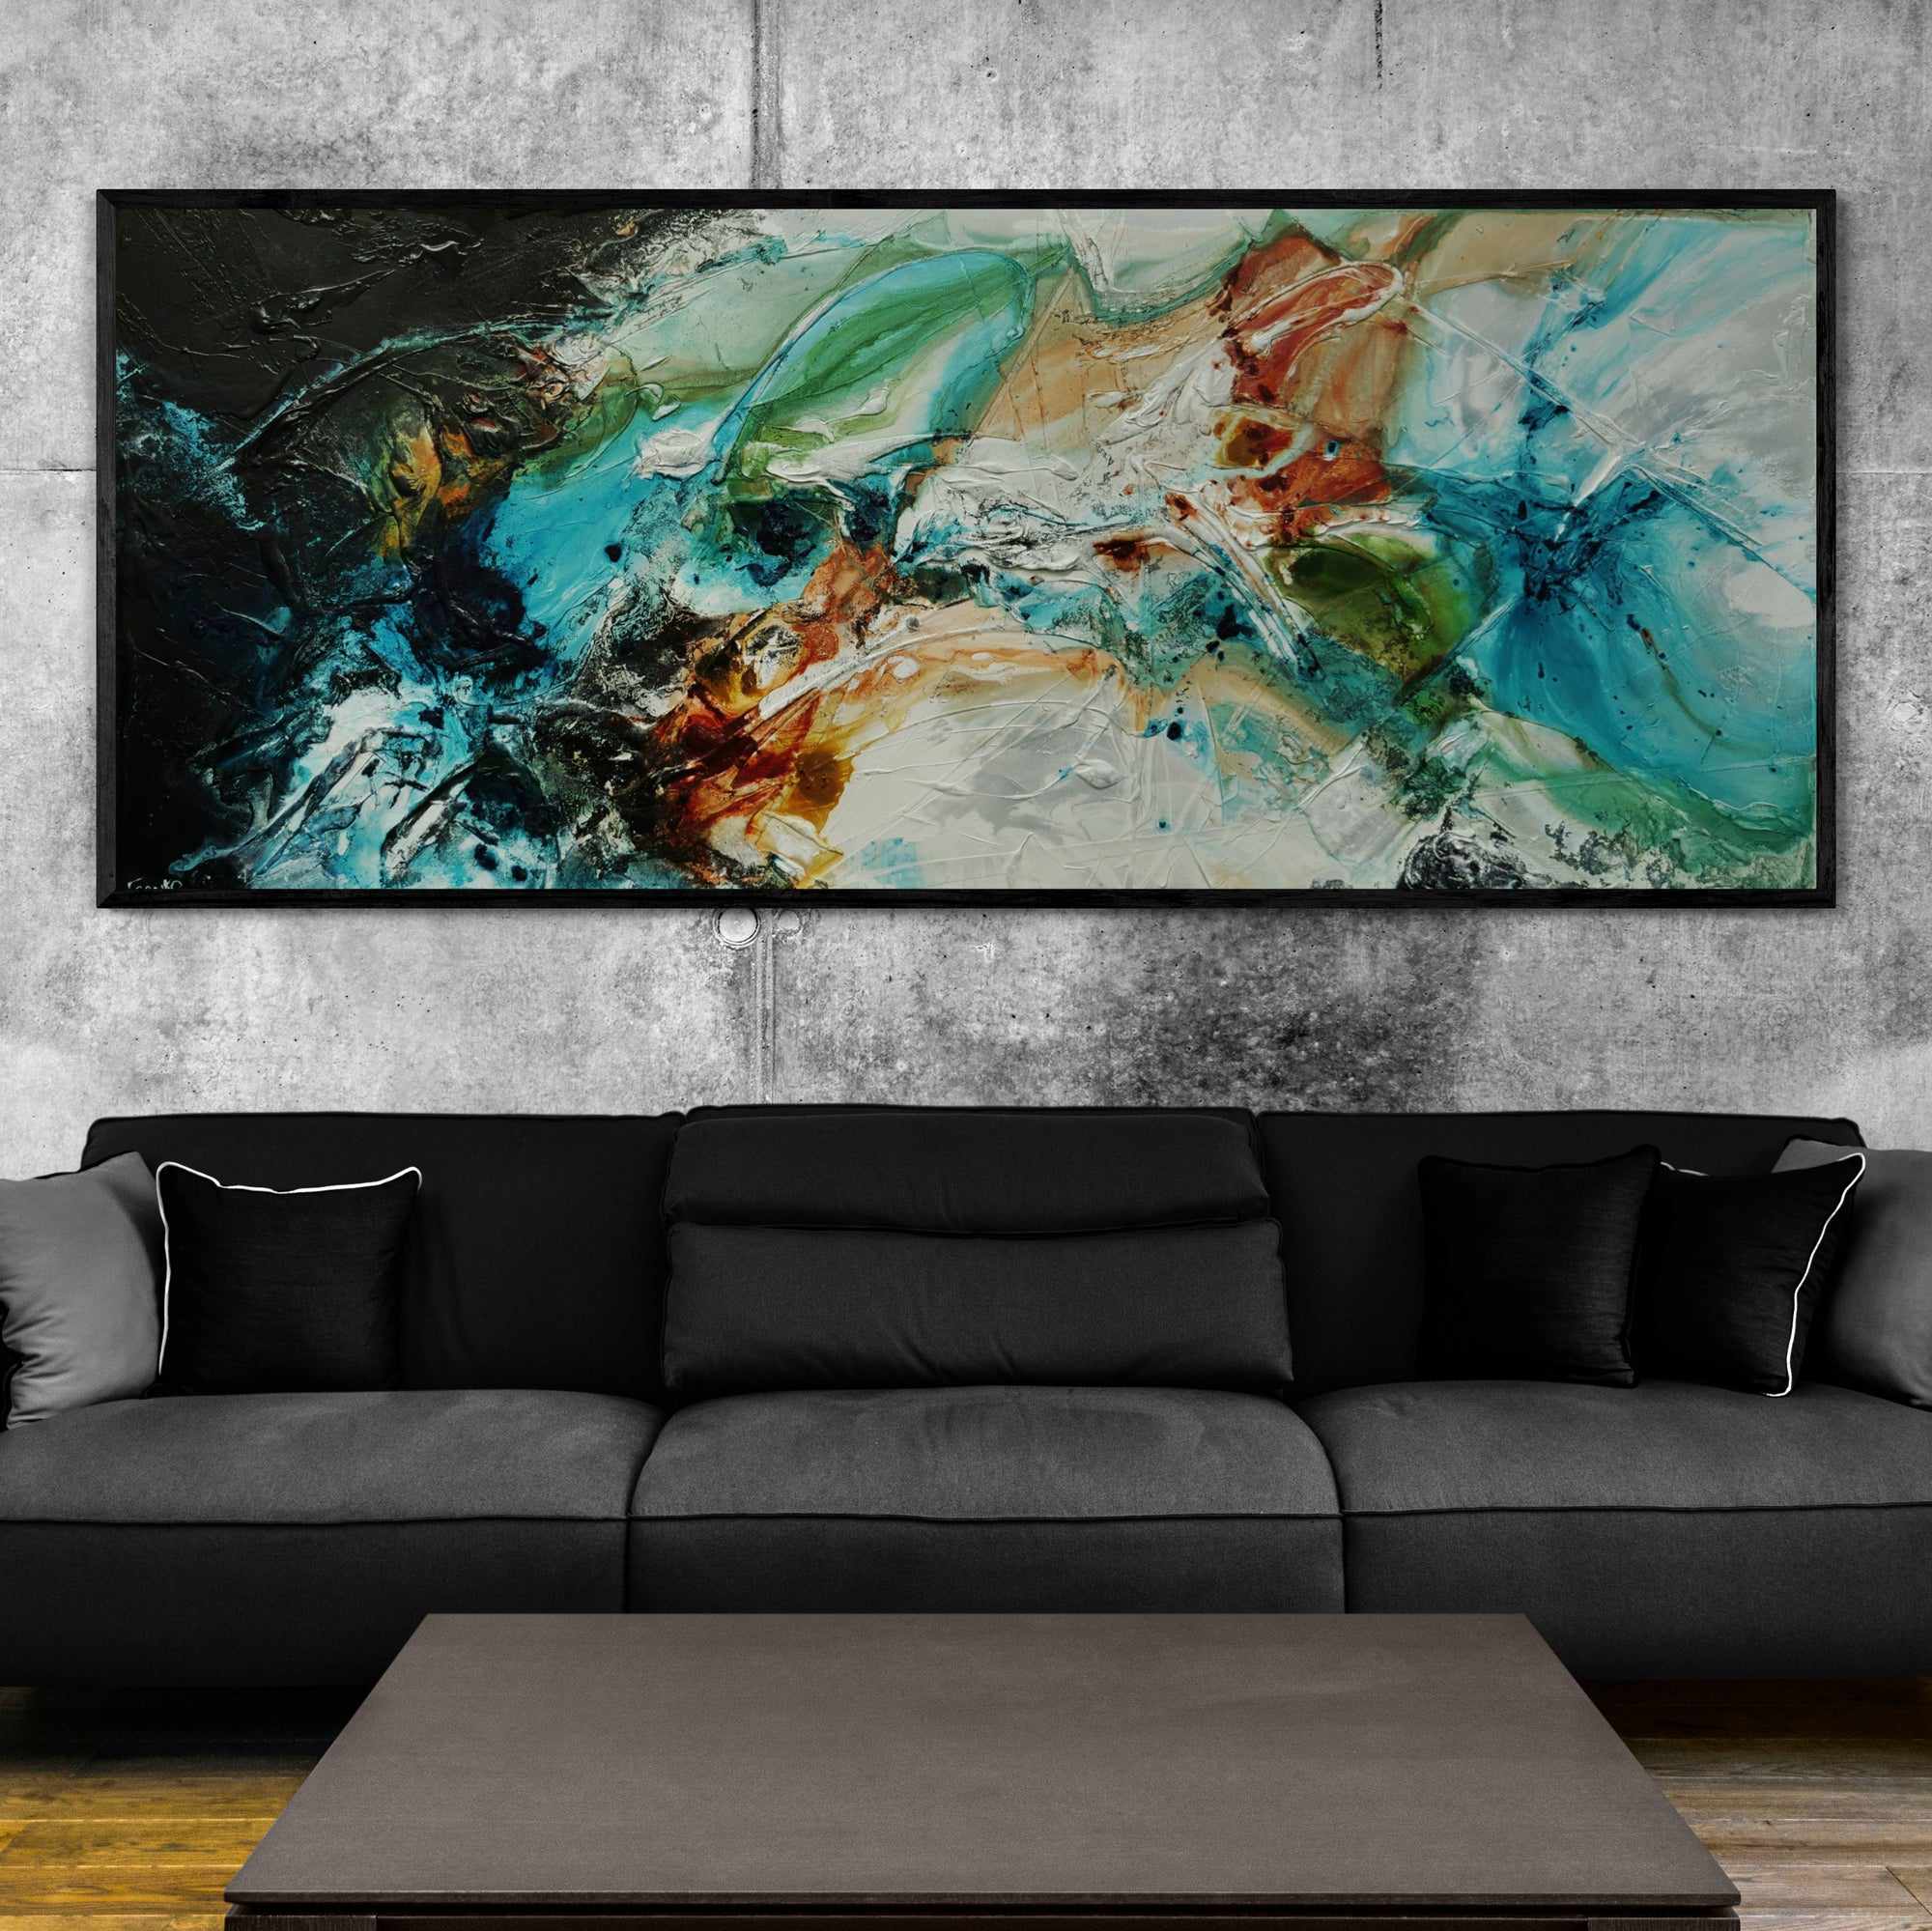 Iron and Oxide 240cm x 100cm Black White Teal Textured Abstract Painting (SOLD)